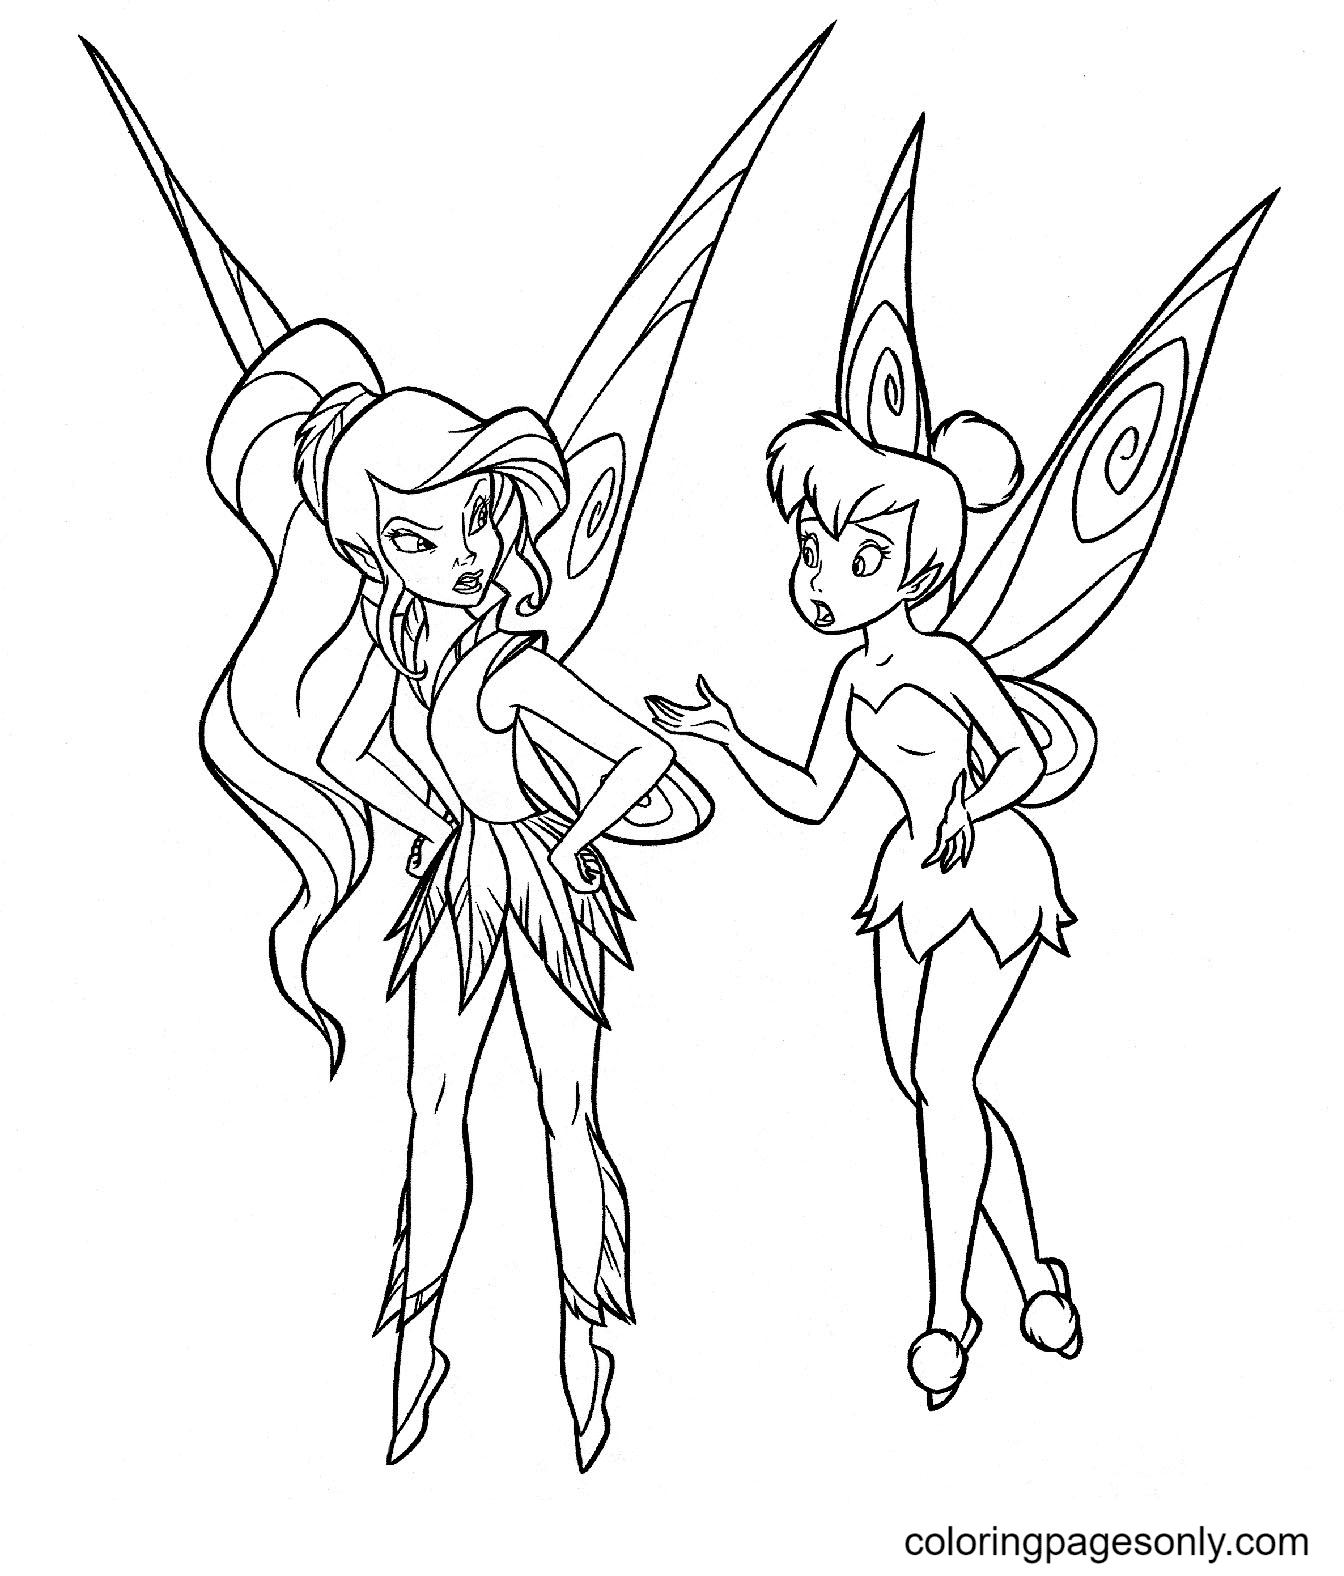 Tinker Bell And Vidia Coloring Page